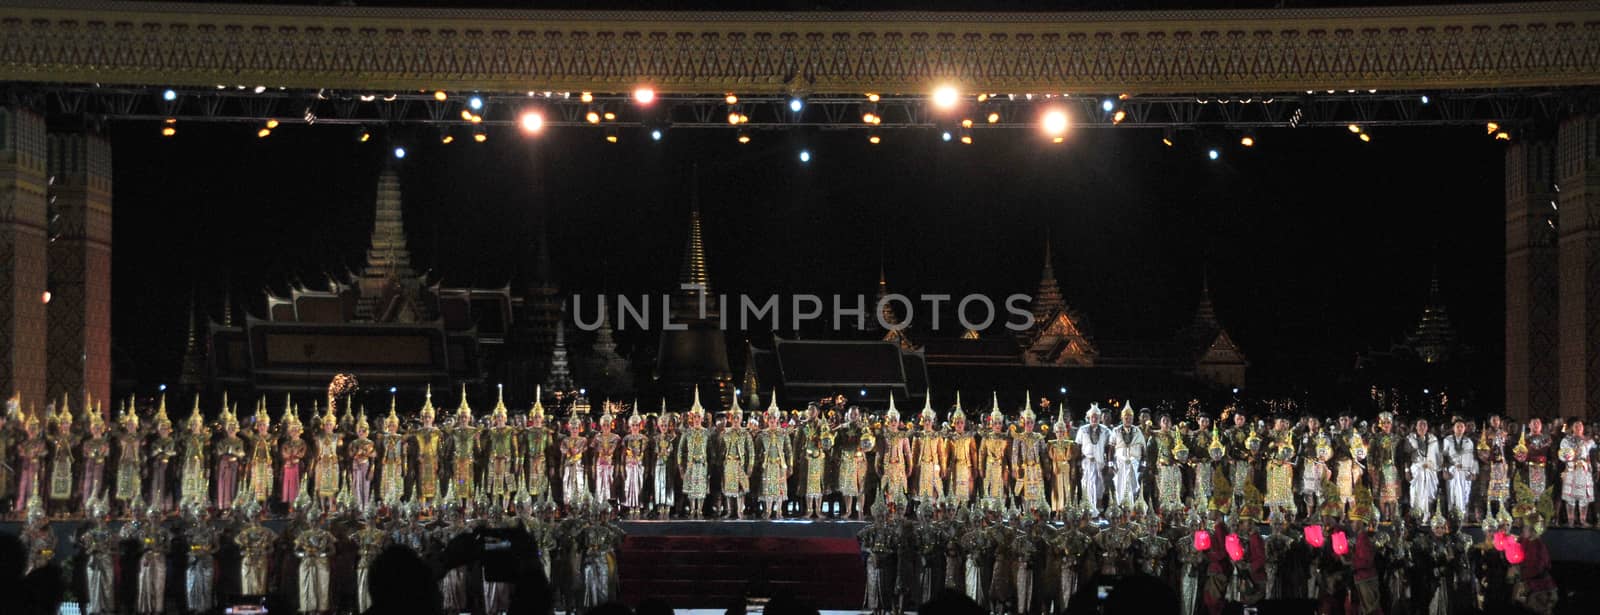 BANGKOK, THAILAND – 22 MAY 2019 : Thai Pantomime (Khon) Performance for the king's coronation ceremony at Sanam Laung,the royal multi purpose land in front of the Grand Palace